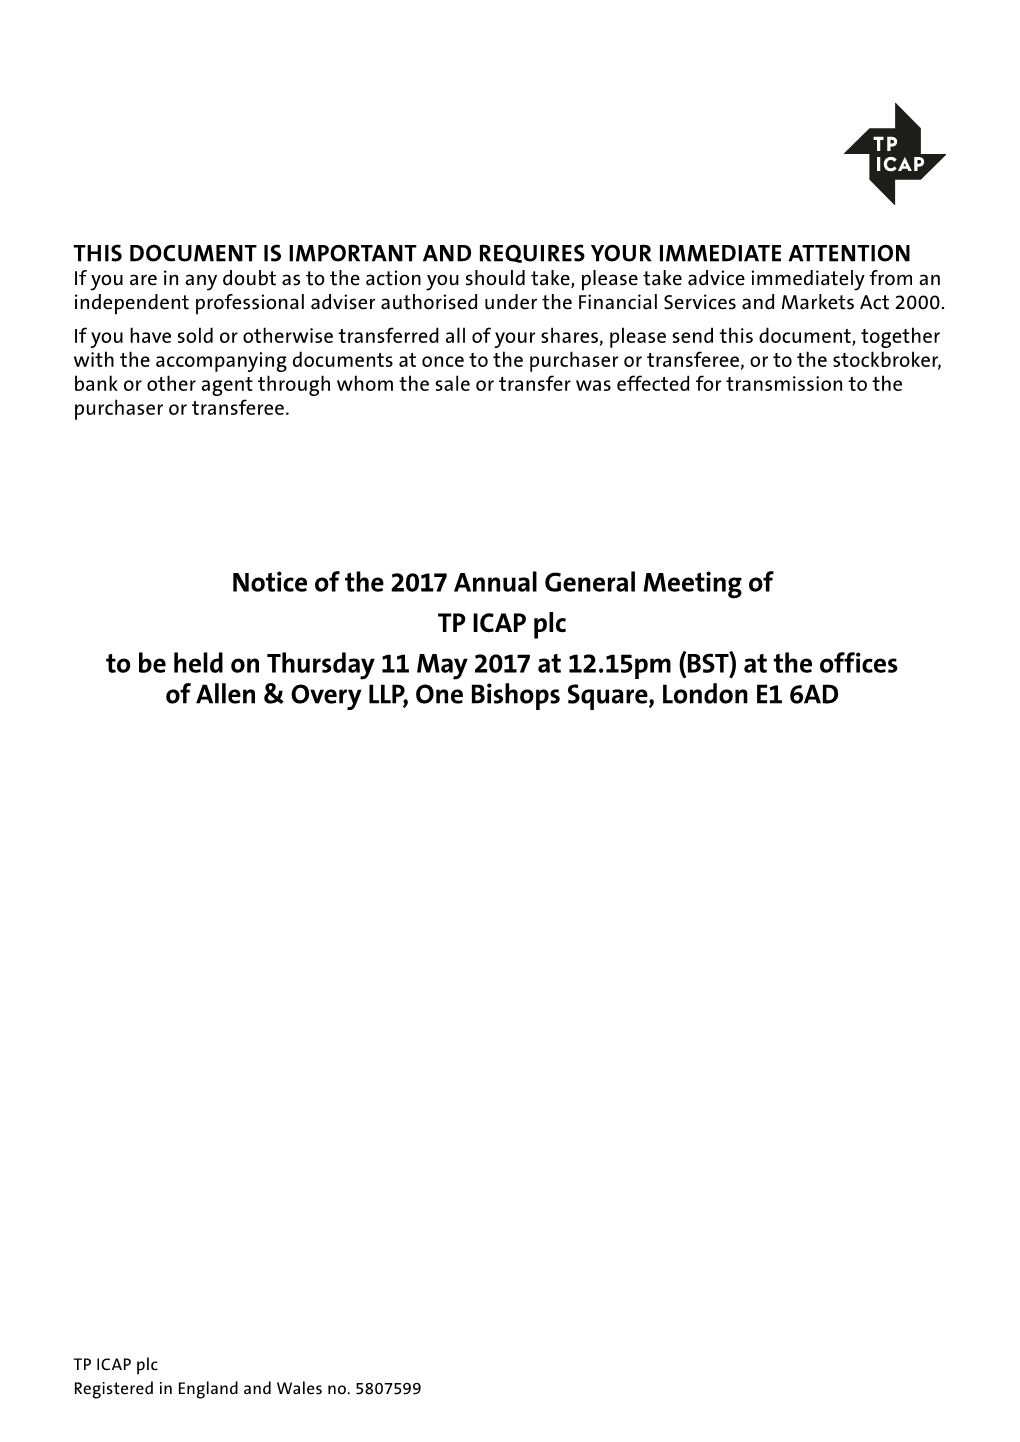 Notice of the 2017 Annual General Meeting of TP ICAP Plc to Be Held